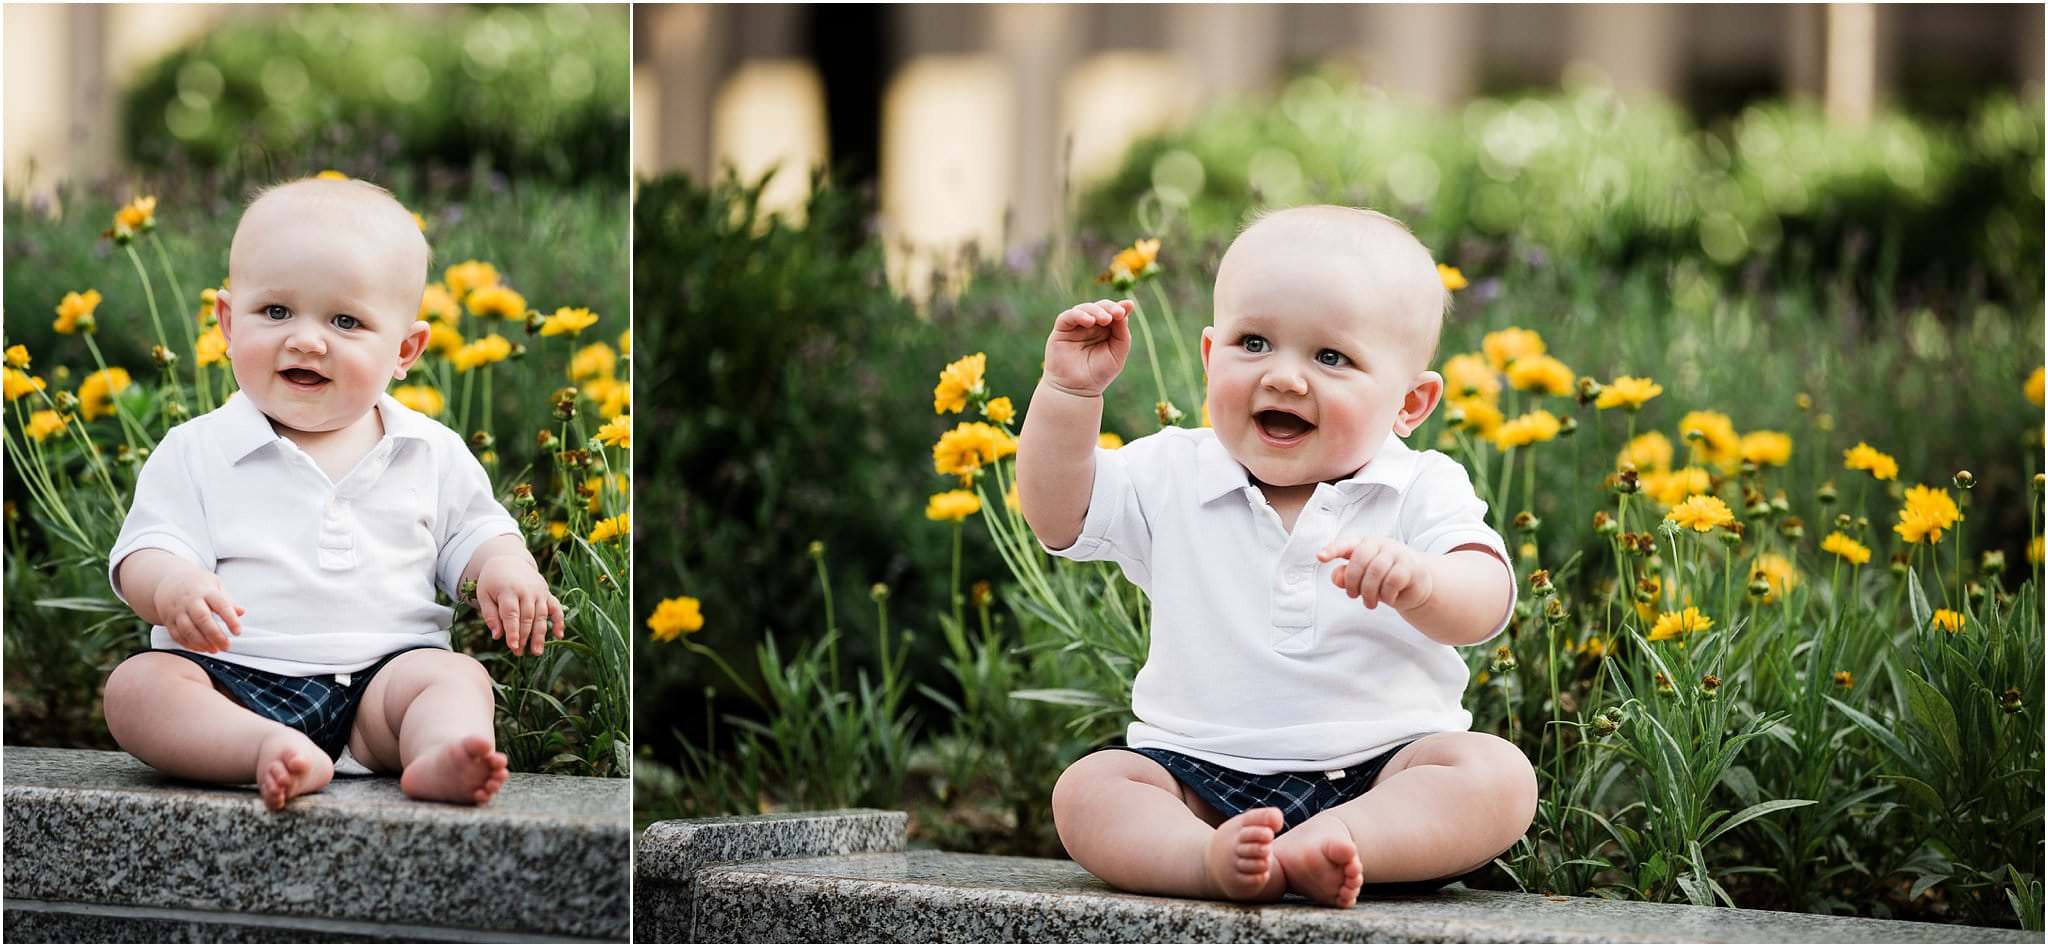 6 month photo session in Downtown Pittsburgh